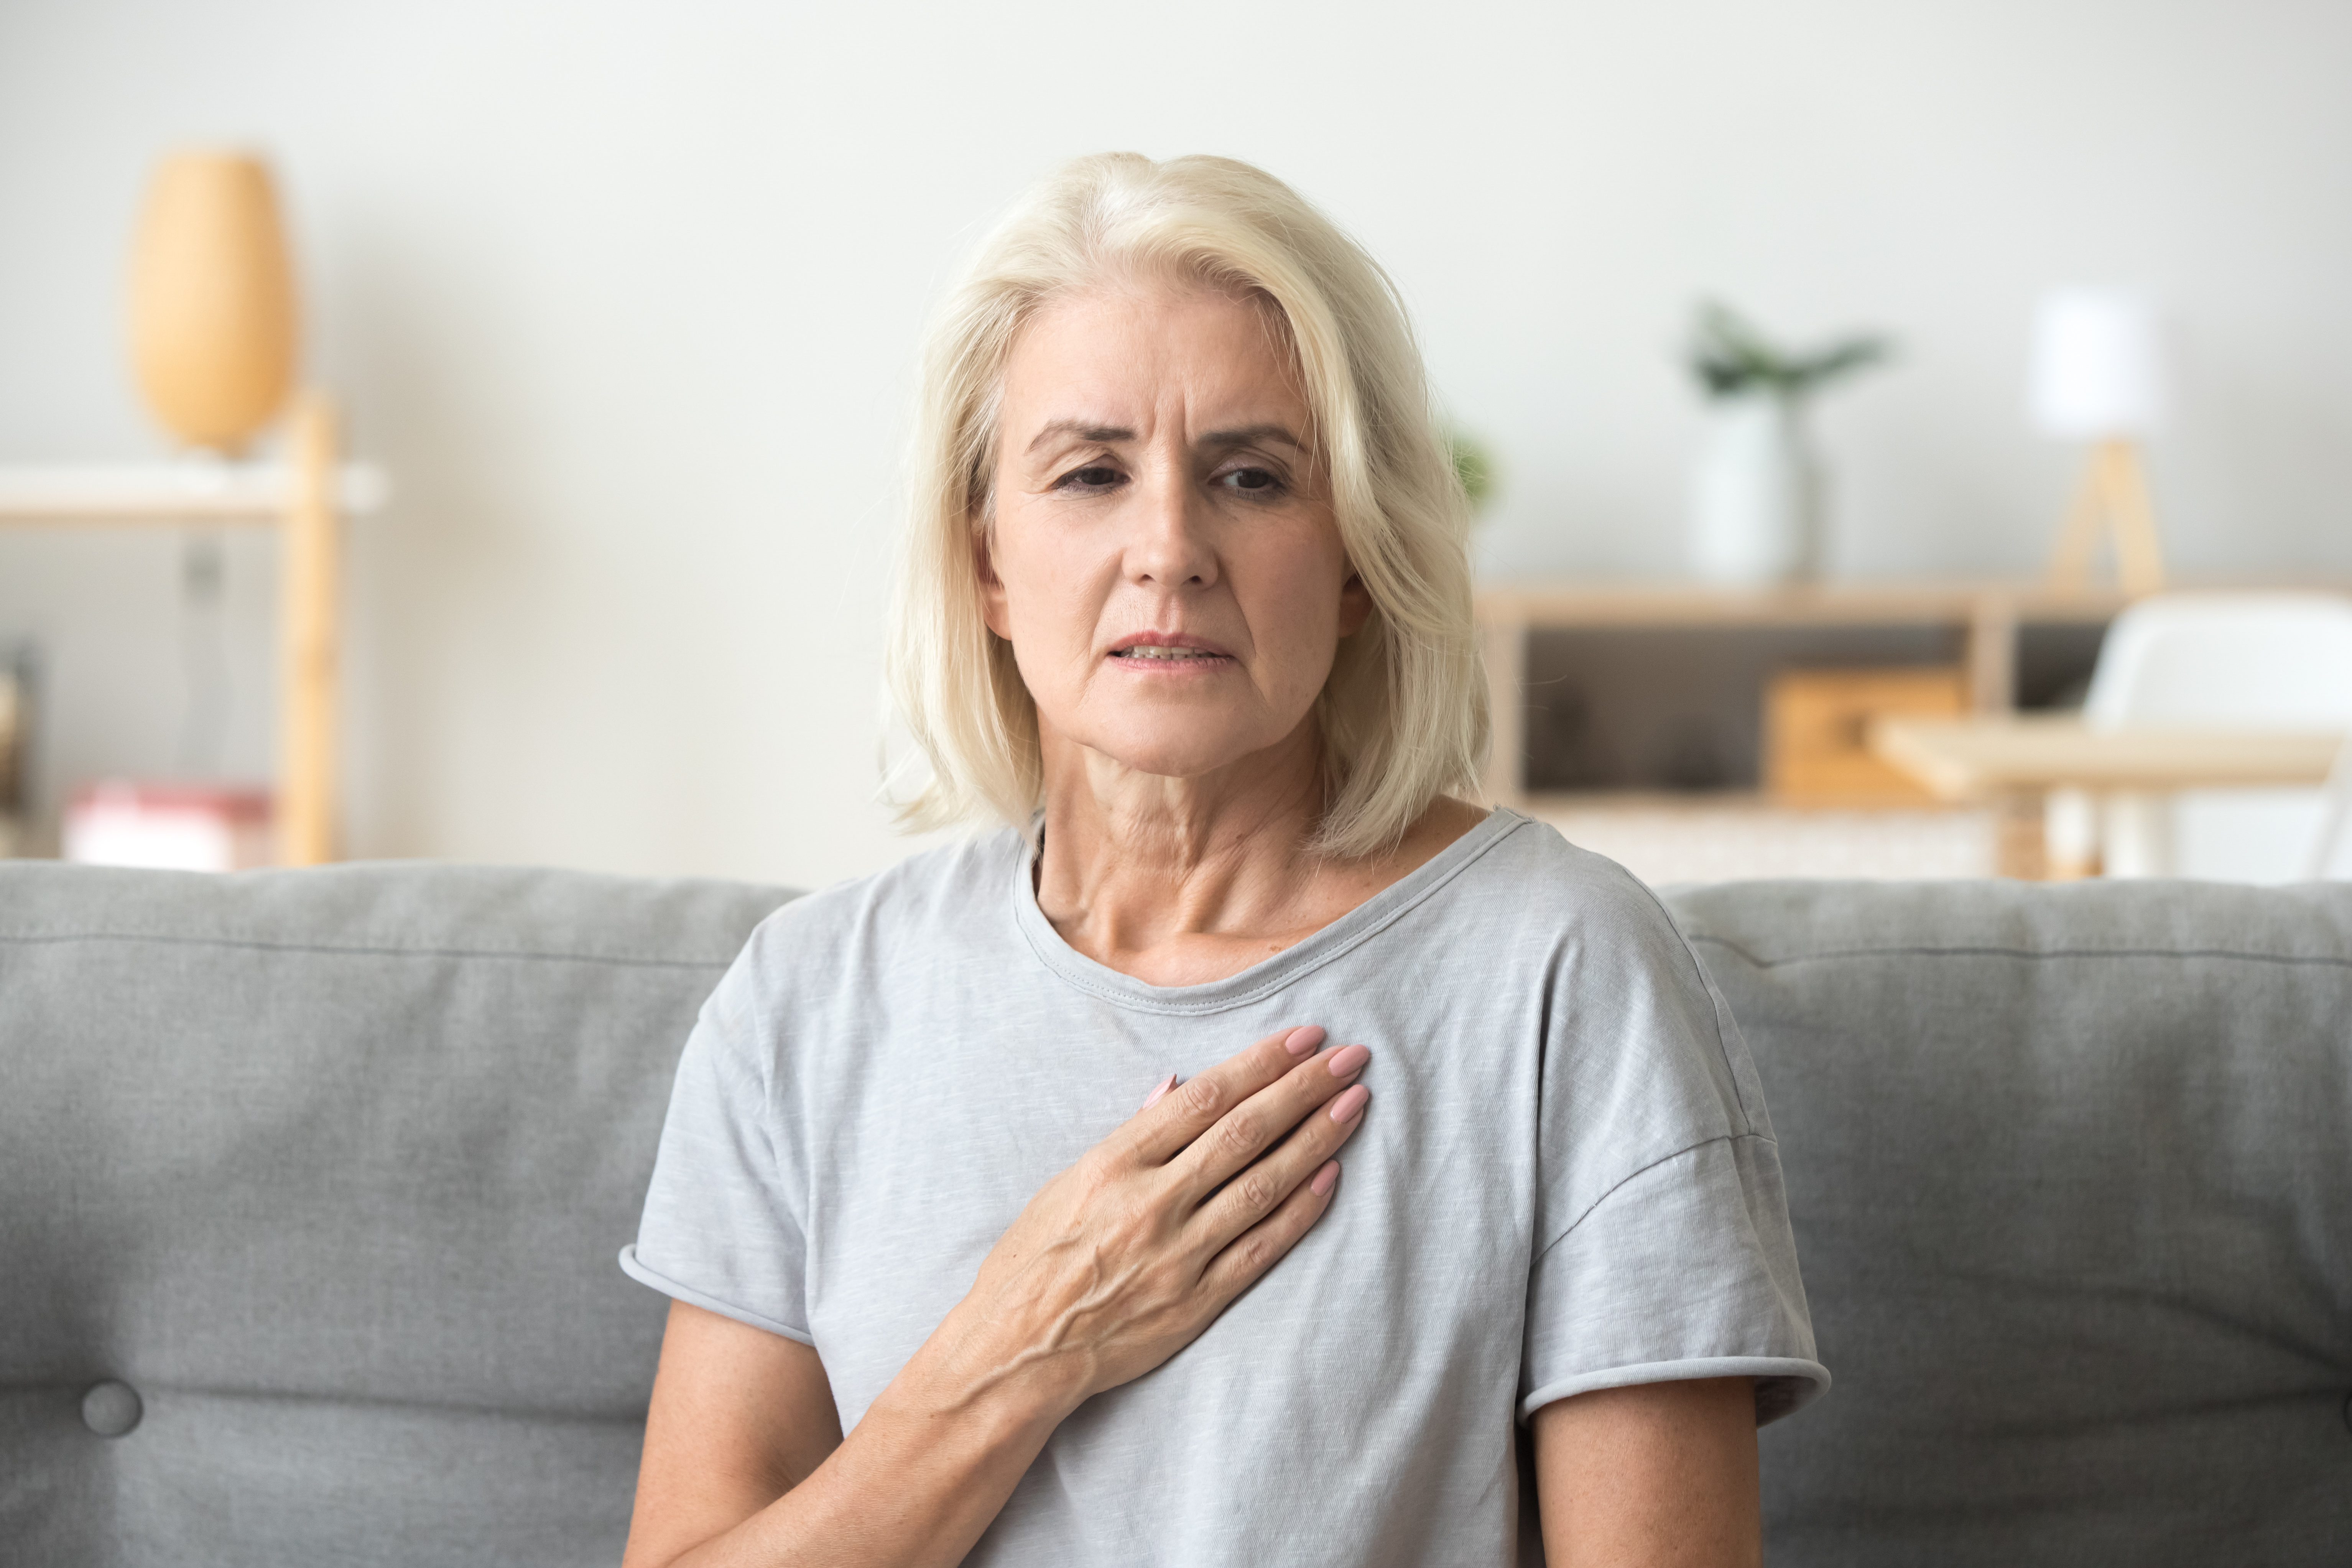 Upset stressed mature older woman feeling heartache touching chest